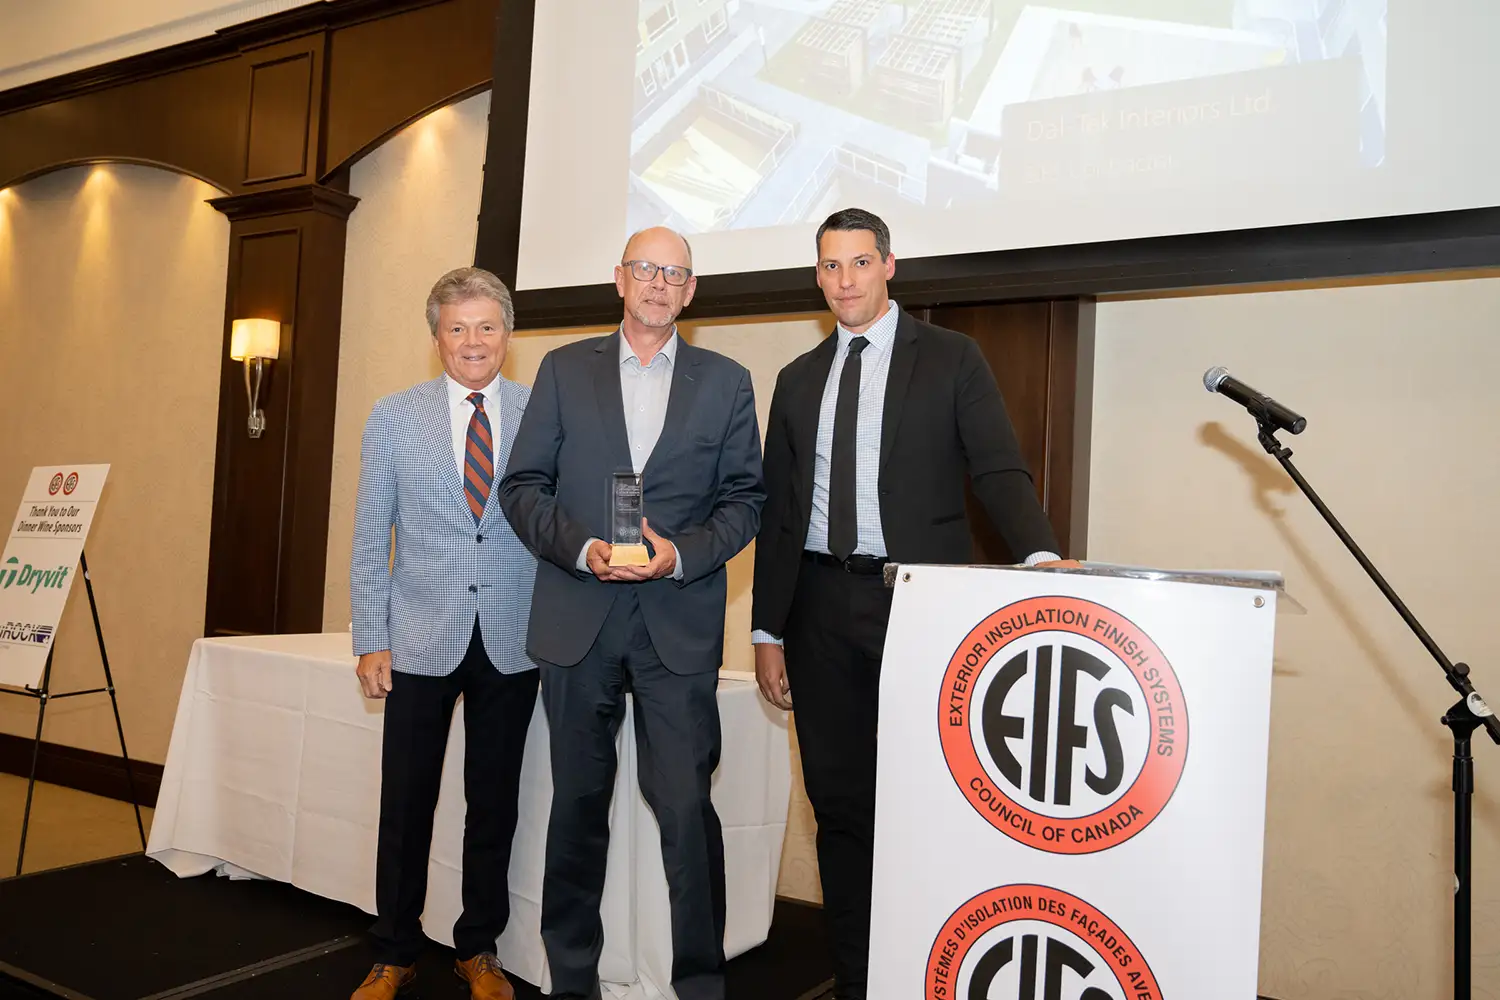 From Left: John M. Garbin, (President/CEO, ECC), Douglas Lang (NORR Architects Engineers and Planners), Nick Swerdfeger (ECC Judging Panel chair, Barry Bryan Associates) - EIFS Council of Canada